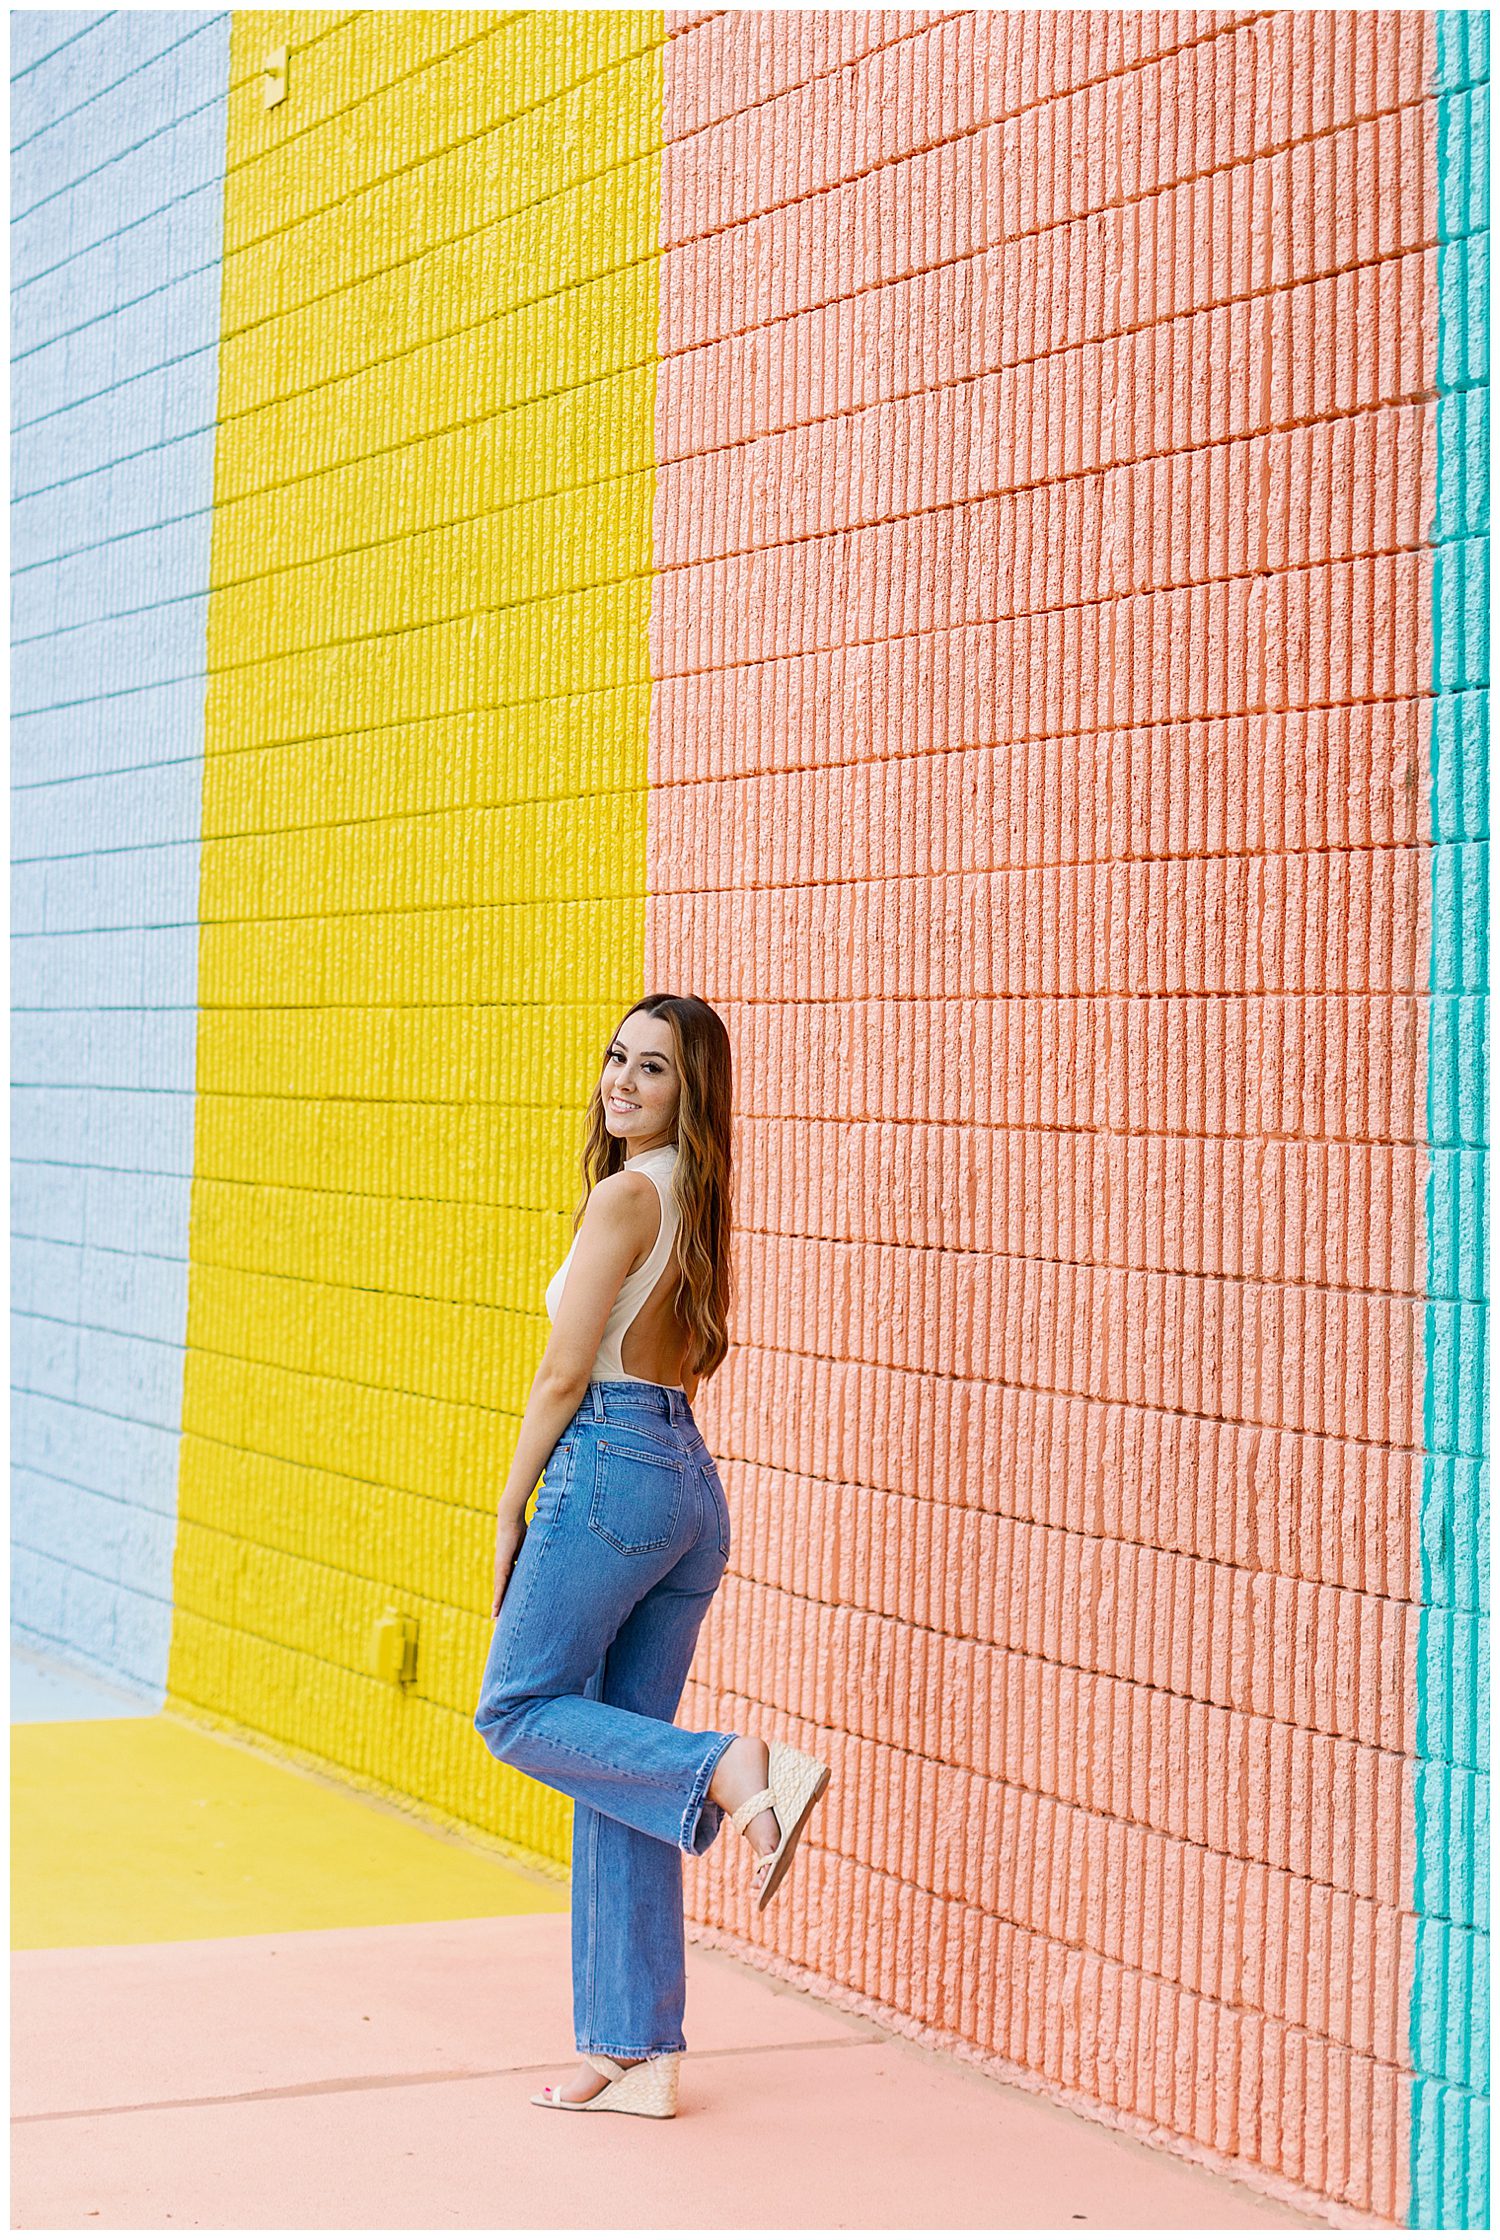 girl in denim jeans and beige unitard kicking heel up for sugar and cloth color wall portraits outdoors Houston